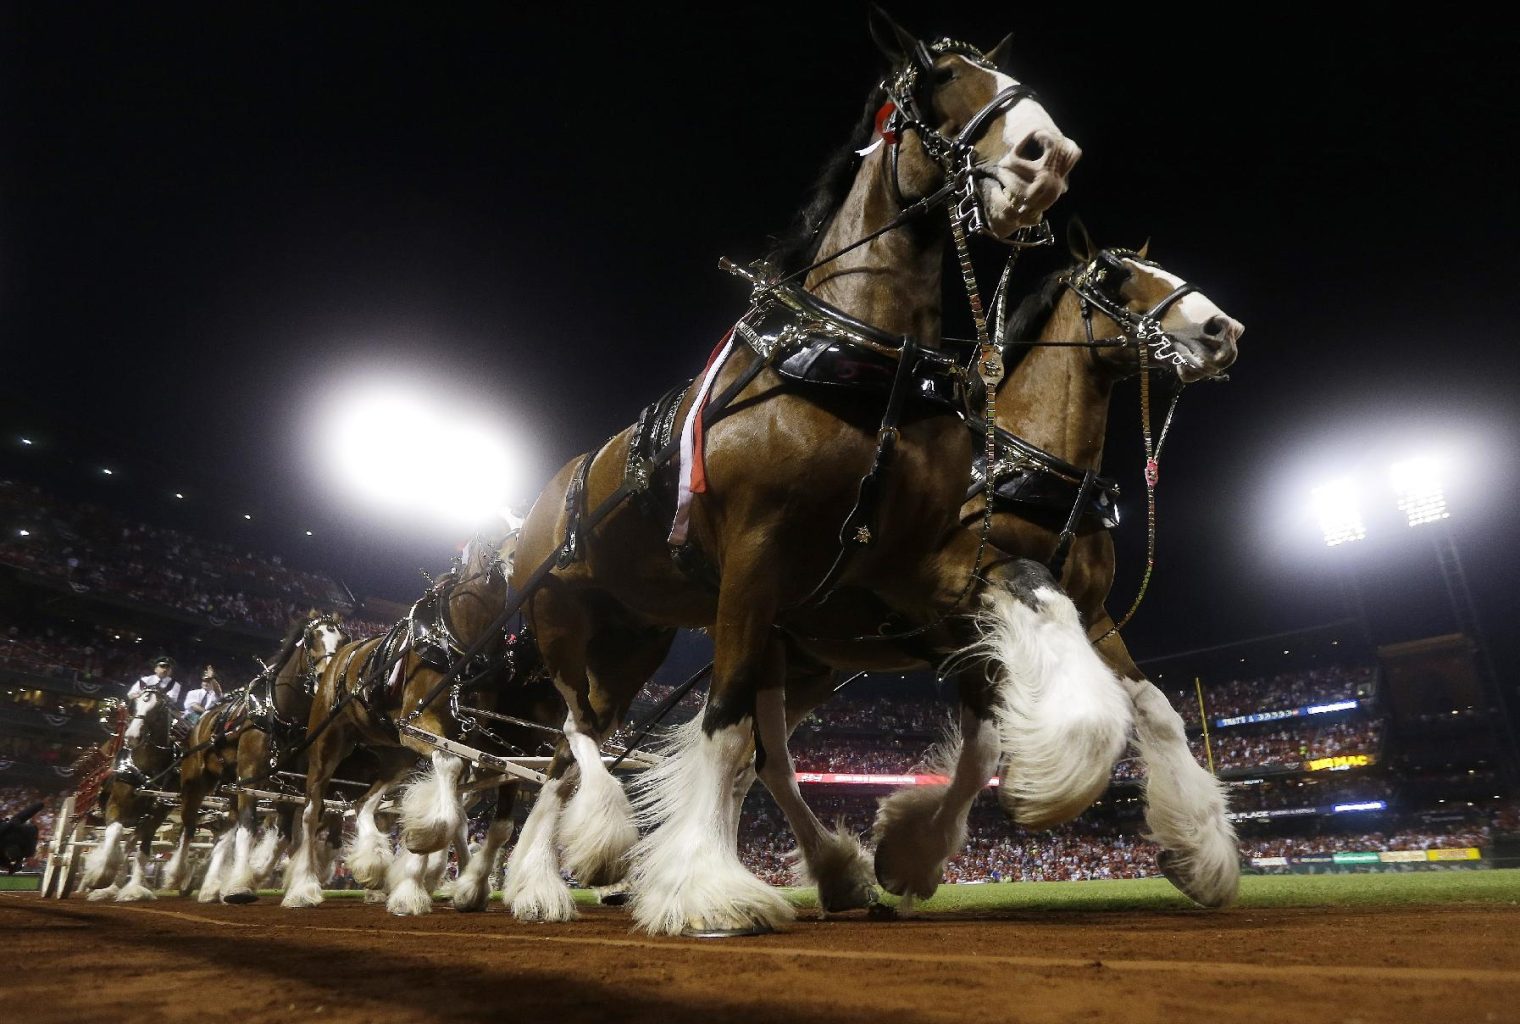 The Budweiser Clydesdales Make Their Way Around Field Before Game